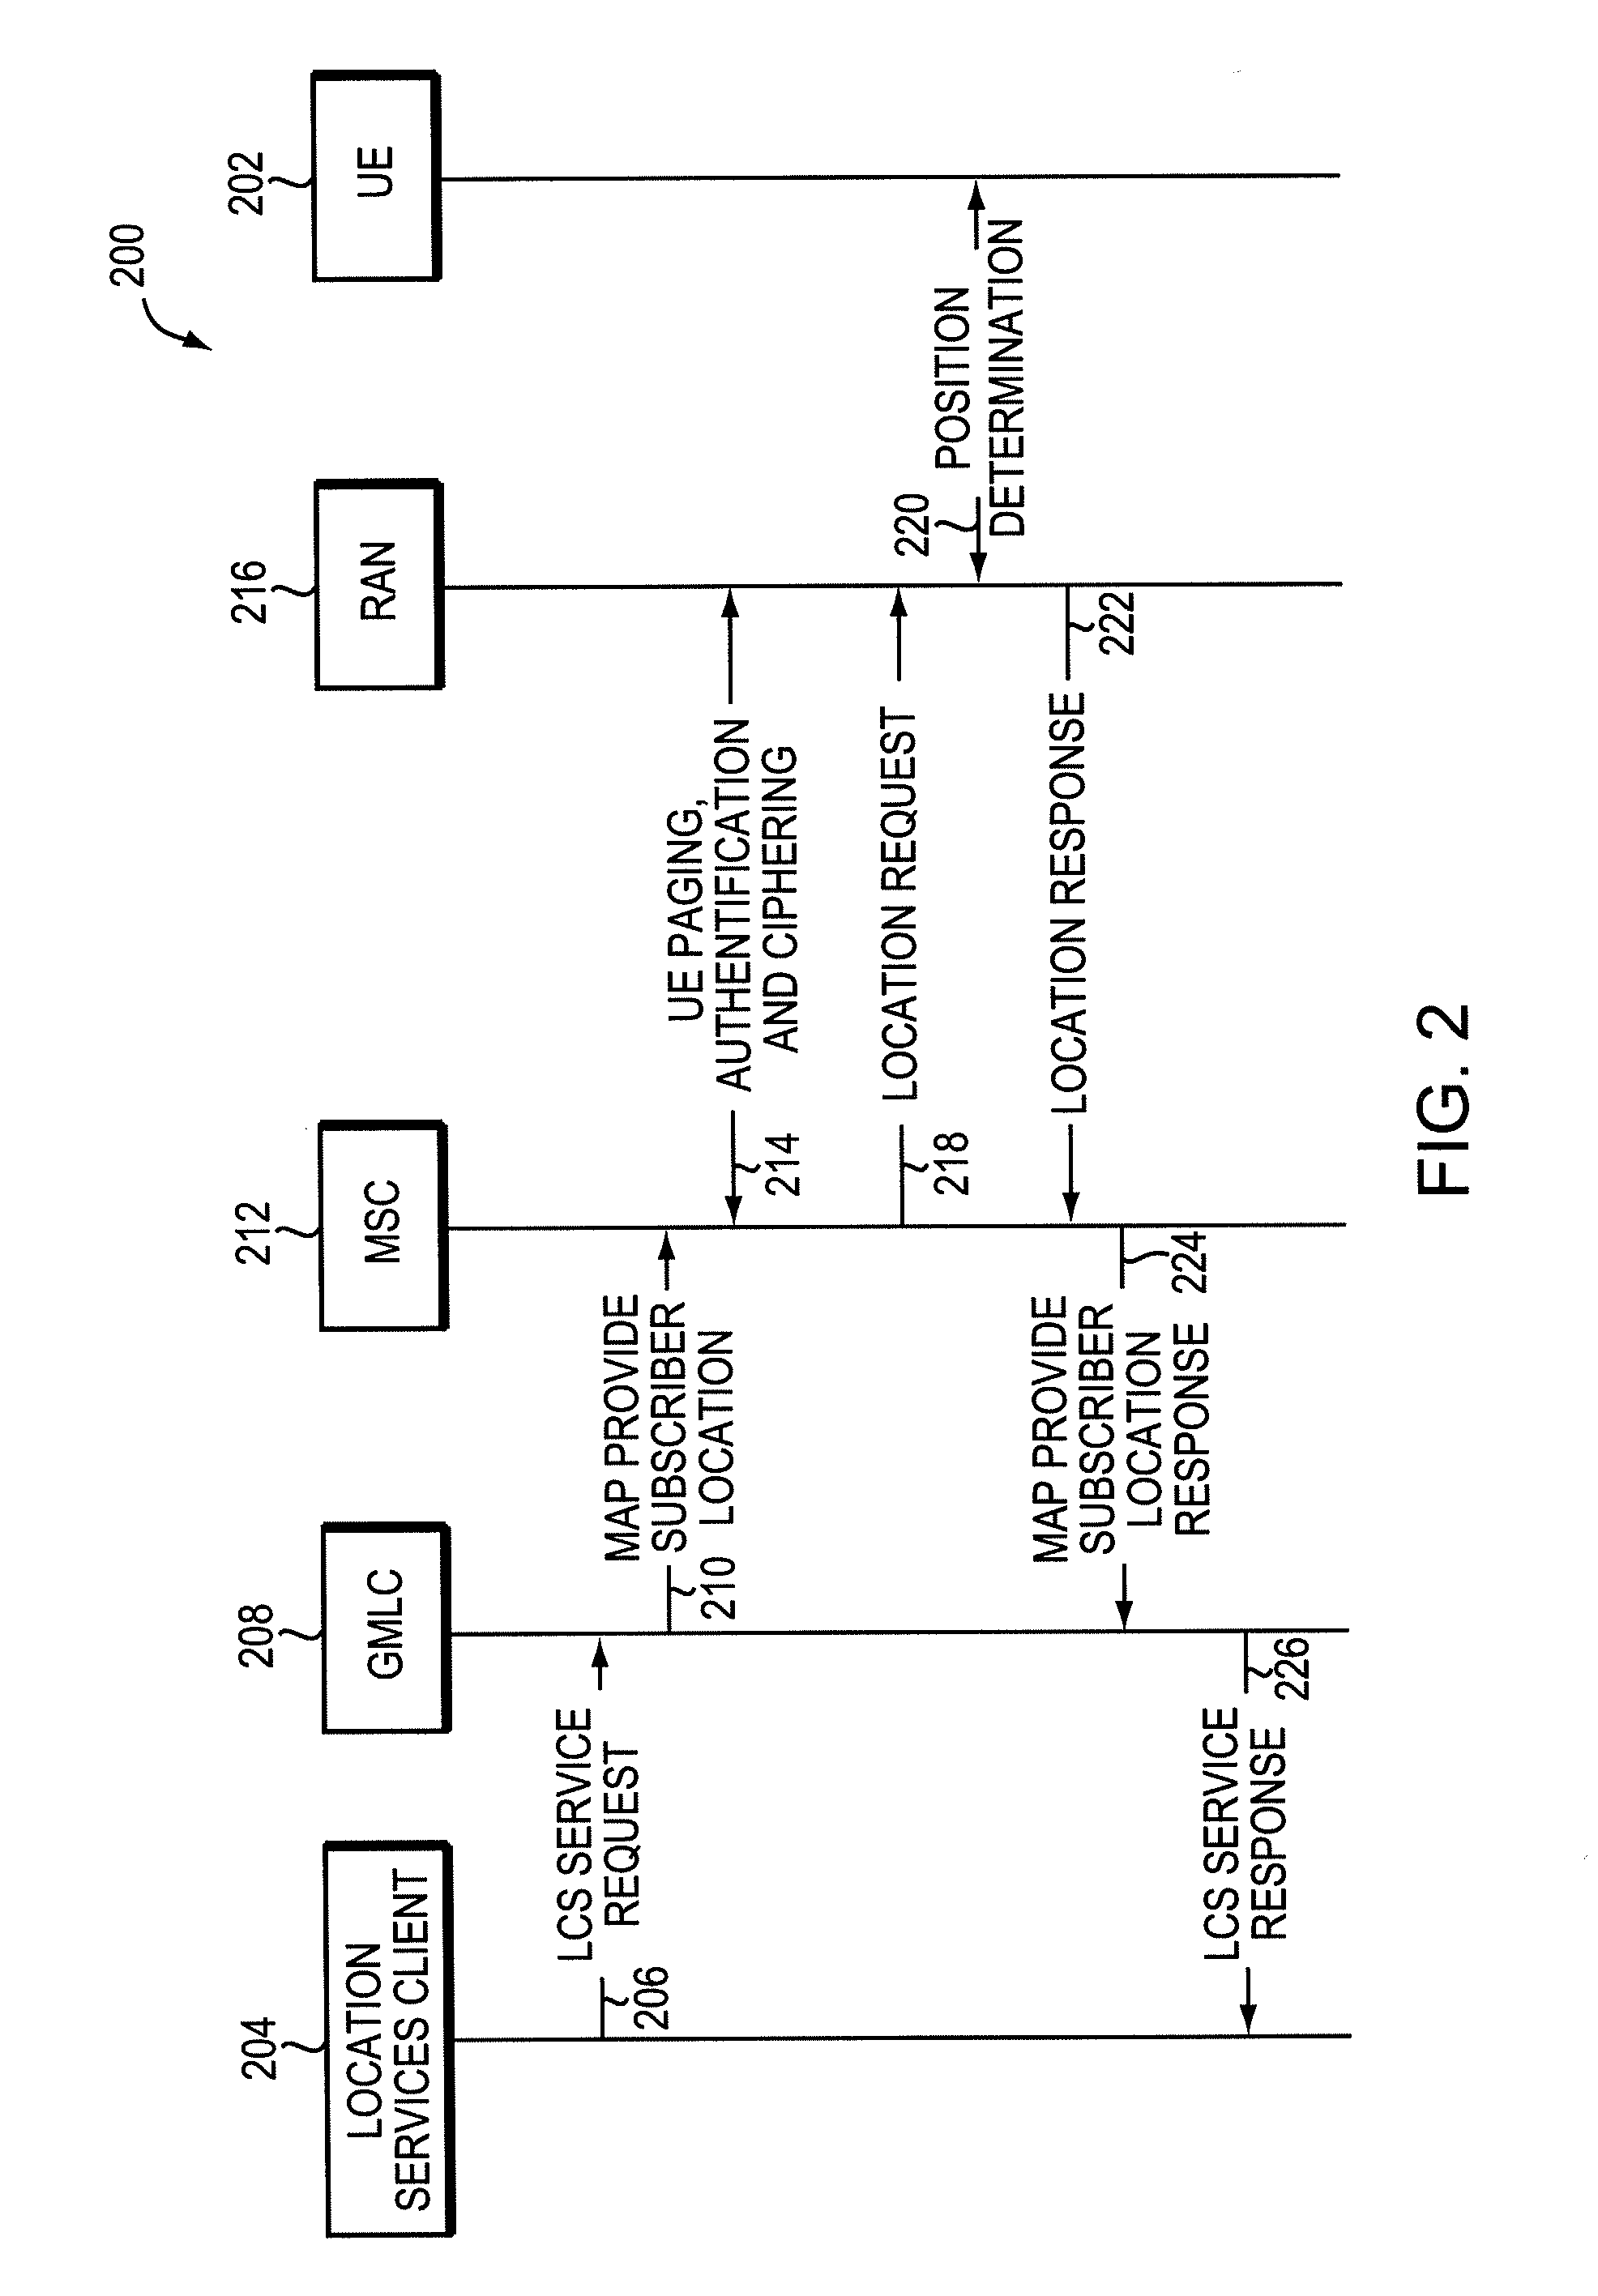 Utilizing Emergency Procedures to Determine Location Information of a Voice Over Internet Protocol Device